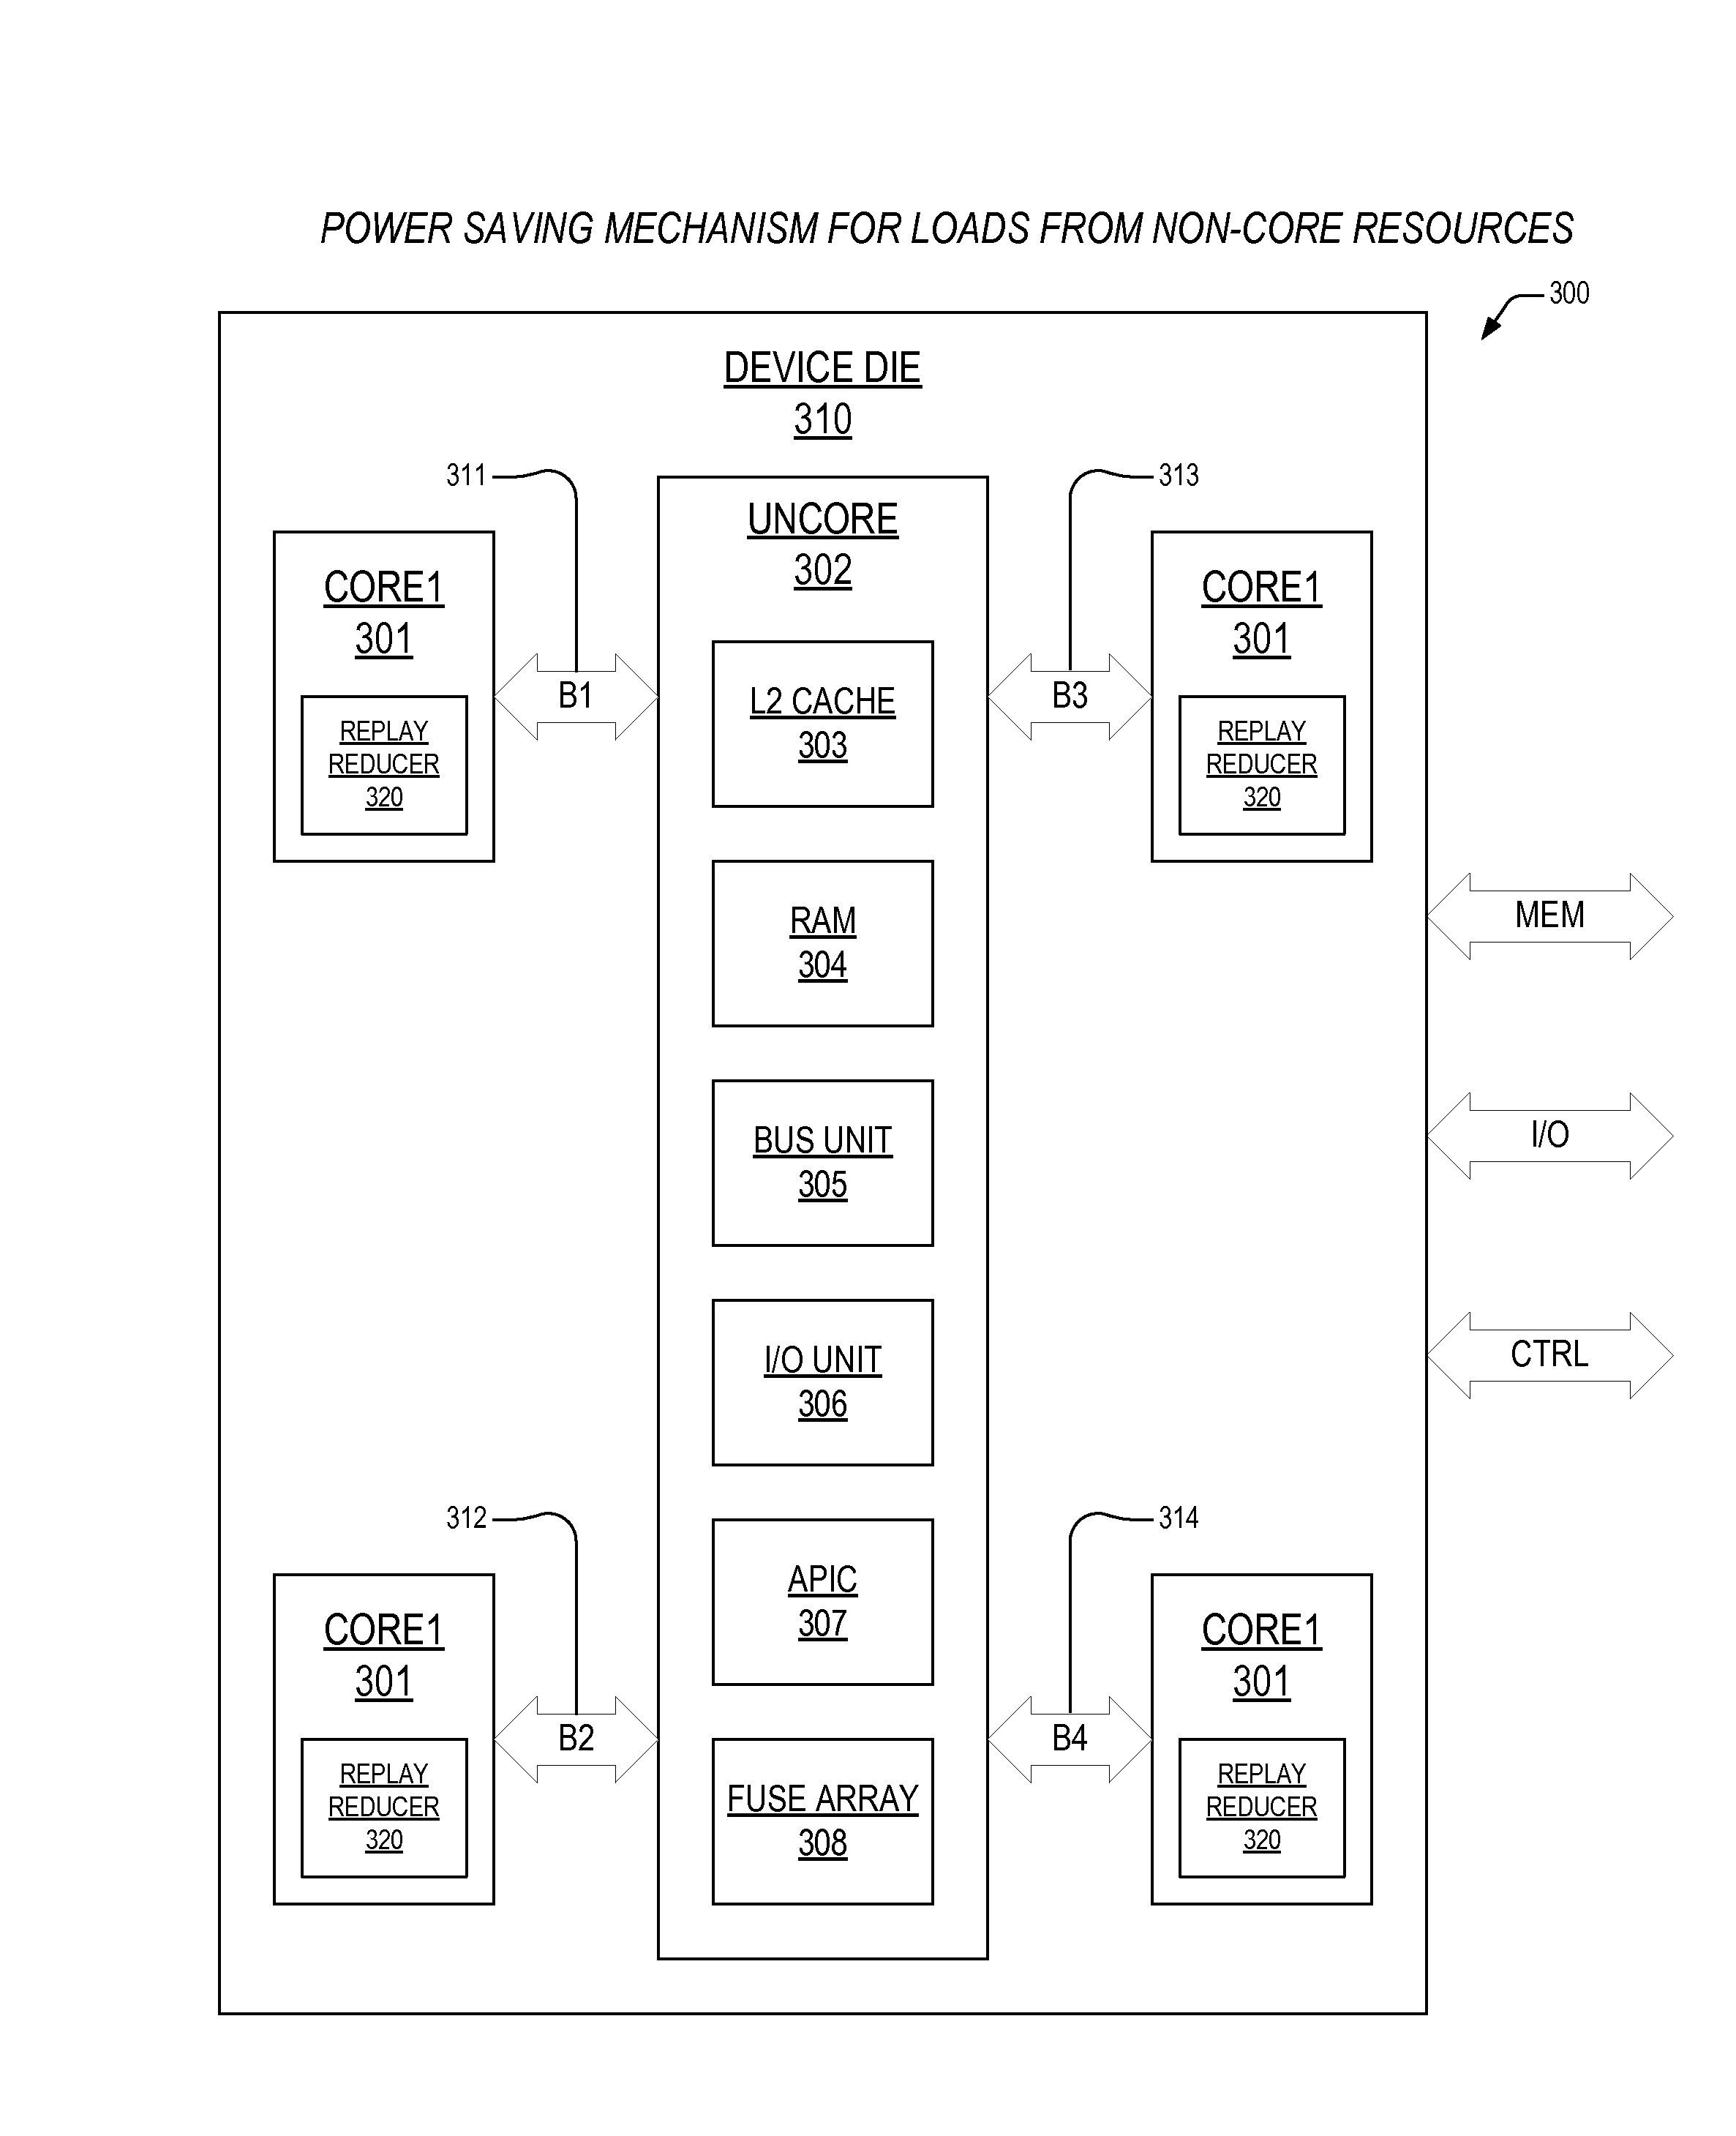 Mechanism to preclude i/o-dependent load replays in an out-of-order processor